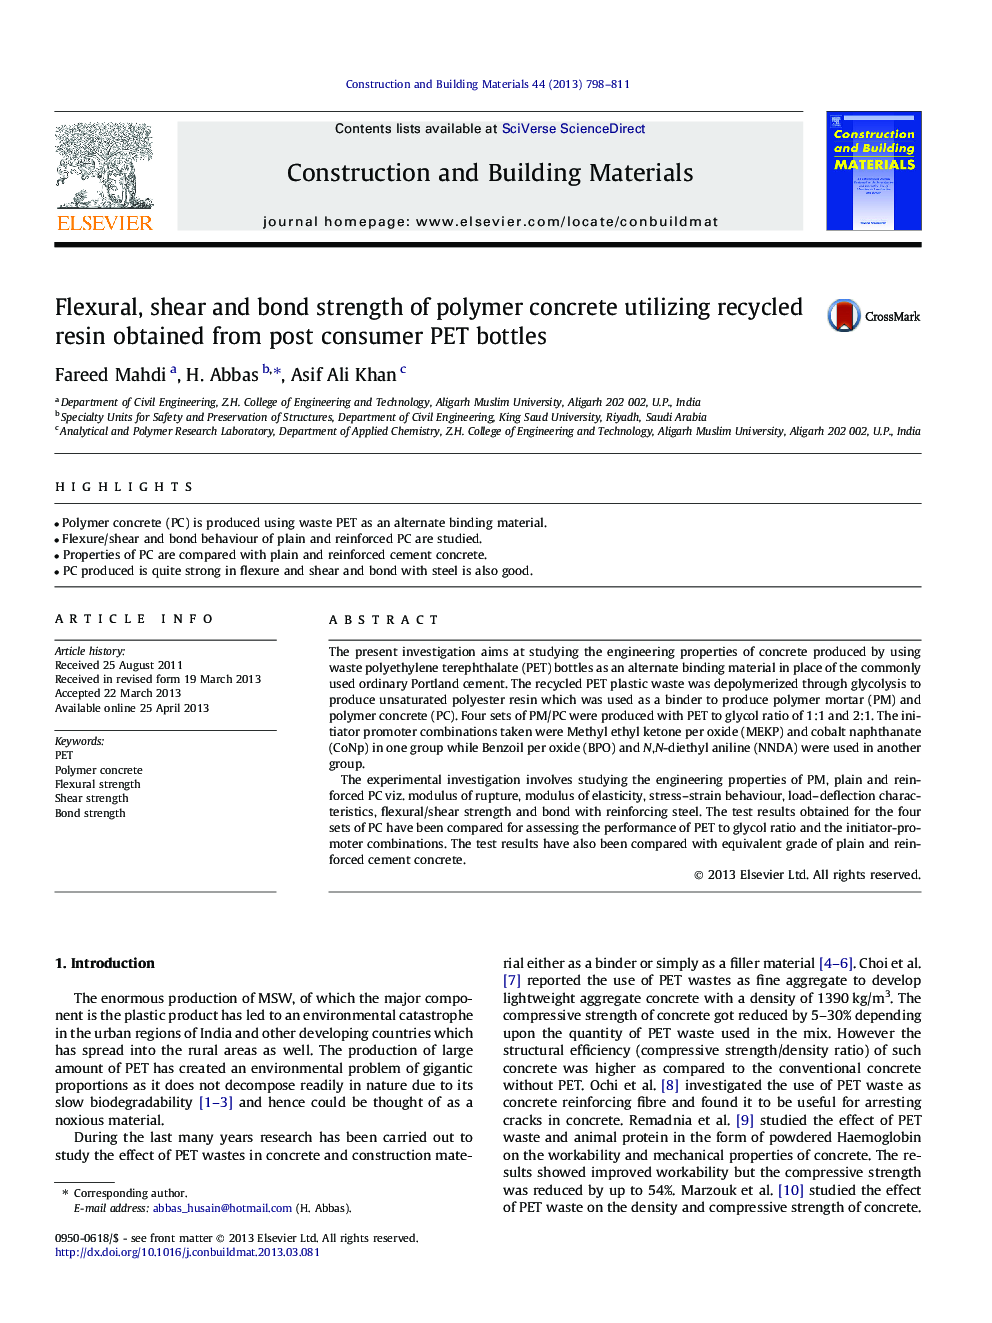 Flexural, shear and bond strength of polymer concrete utilizing recycled resin obtained from post consumer PET bottles